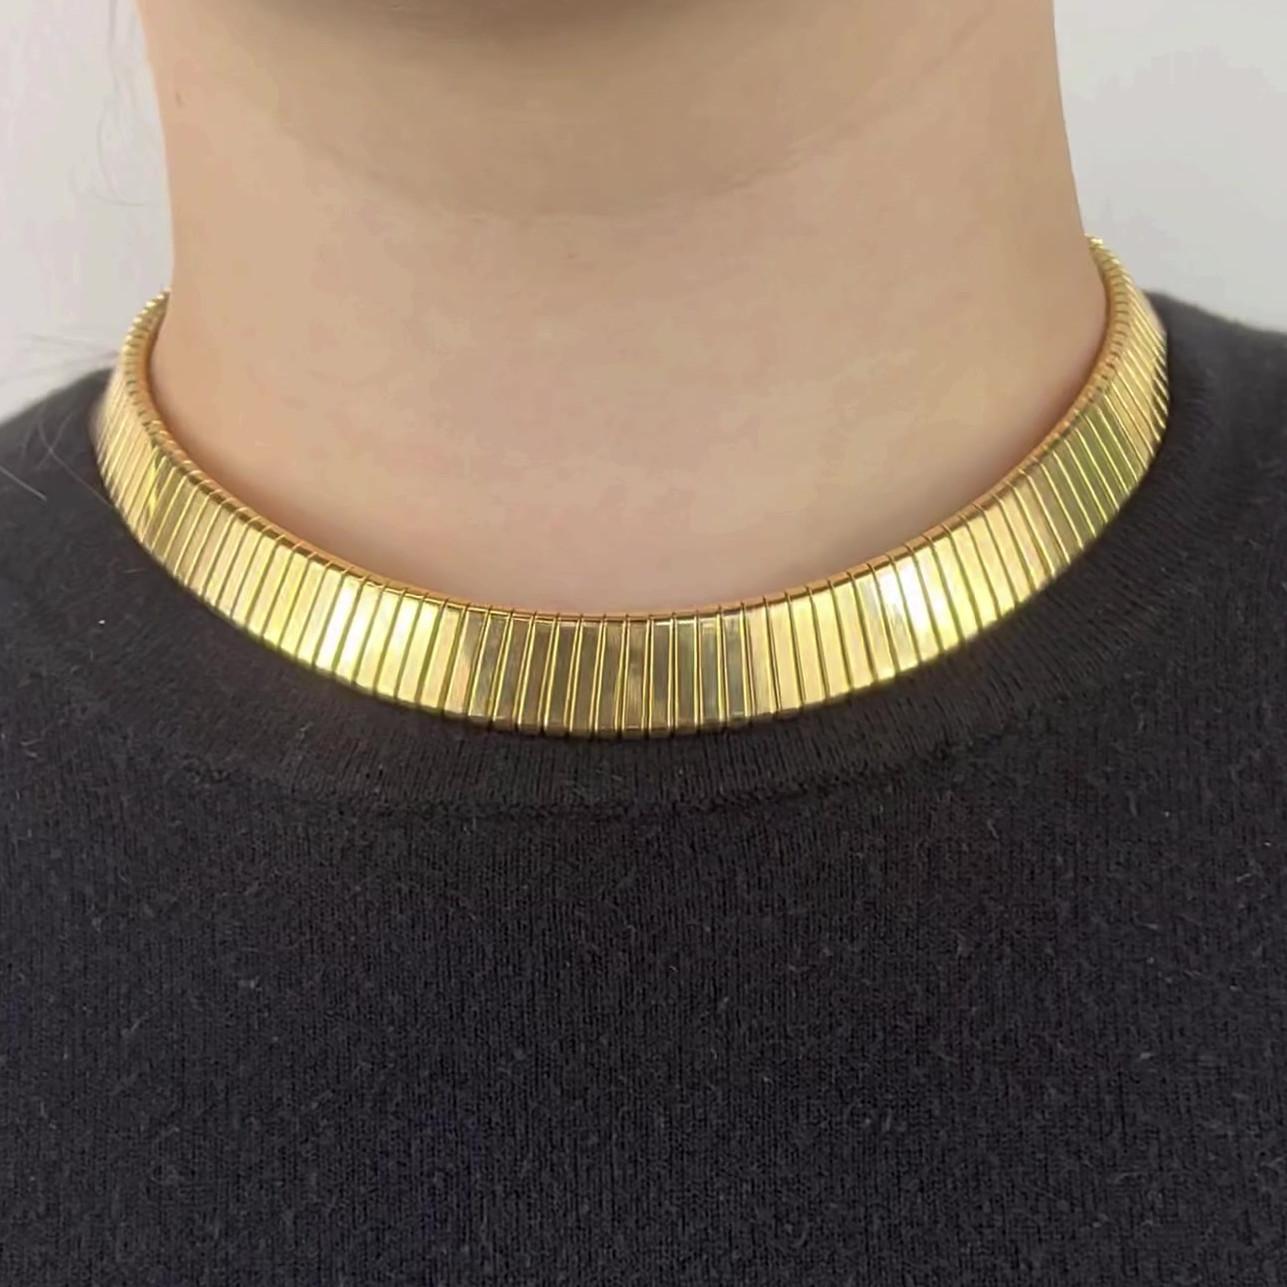 One Bvlgari 18 Karat Gold Tubogas Necklace. Crafted in 18 karat yellow gold, signed Bvlgari with Italian hallmarks. Circa 2010s. The necklace measures 15 1/2 inches in length. 

About this Item: Have you been dreaming about purchasing a classic